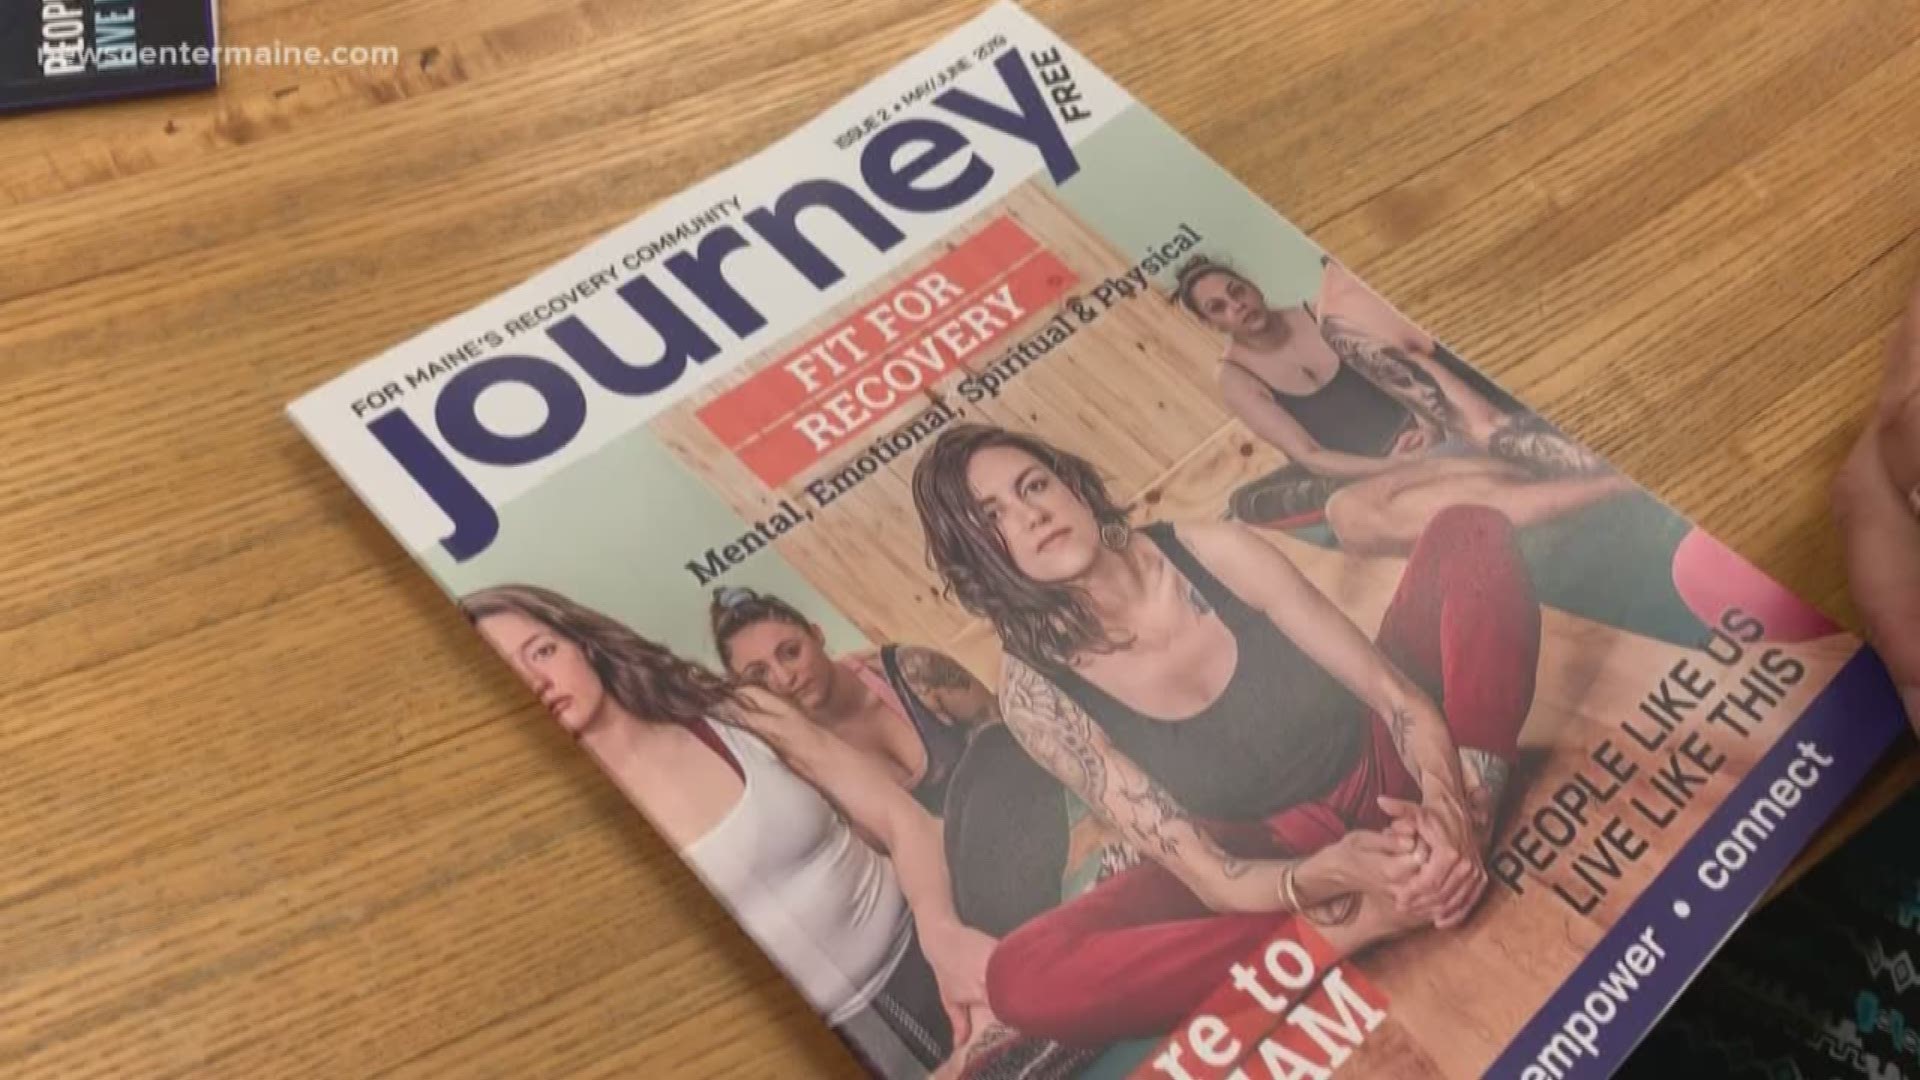 "Journey" is a free magazine in Maine about recovery -- written by people who are in recovery from addiction.